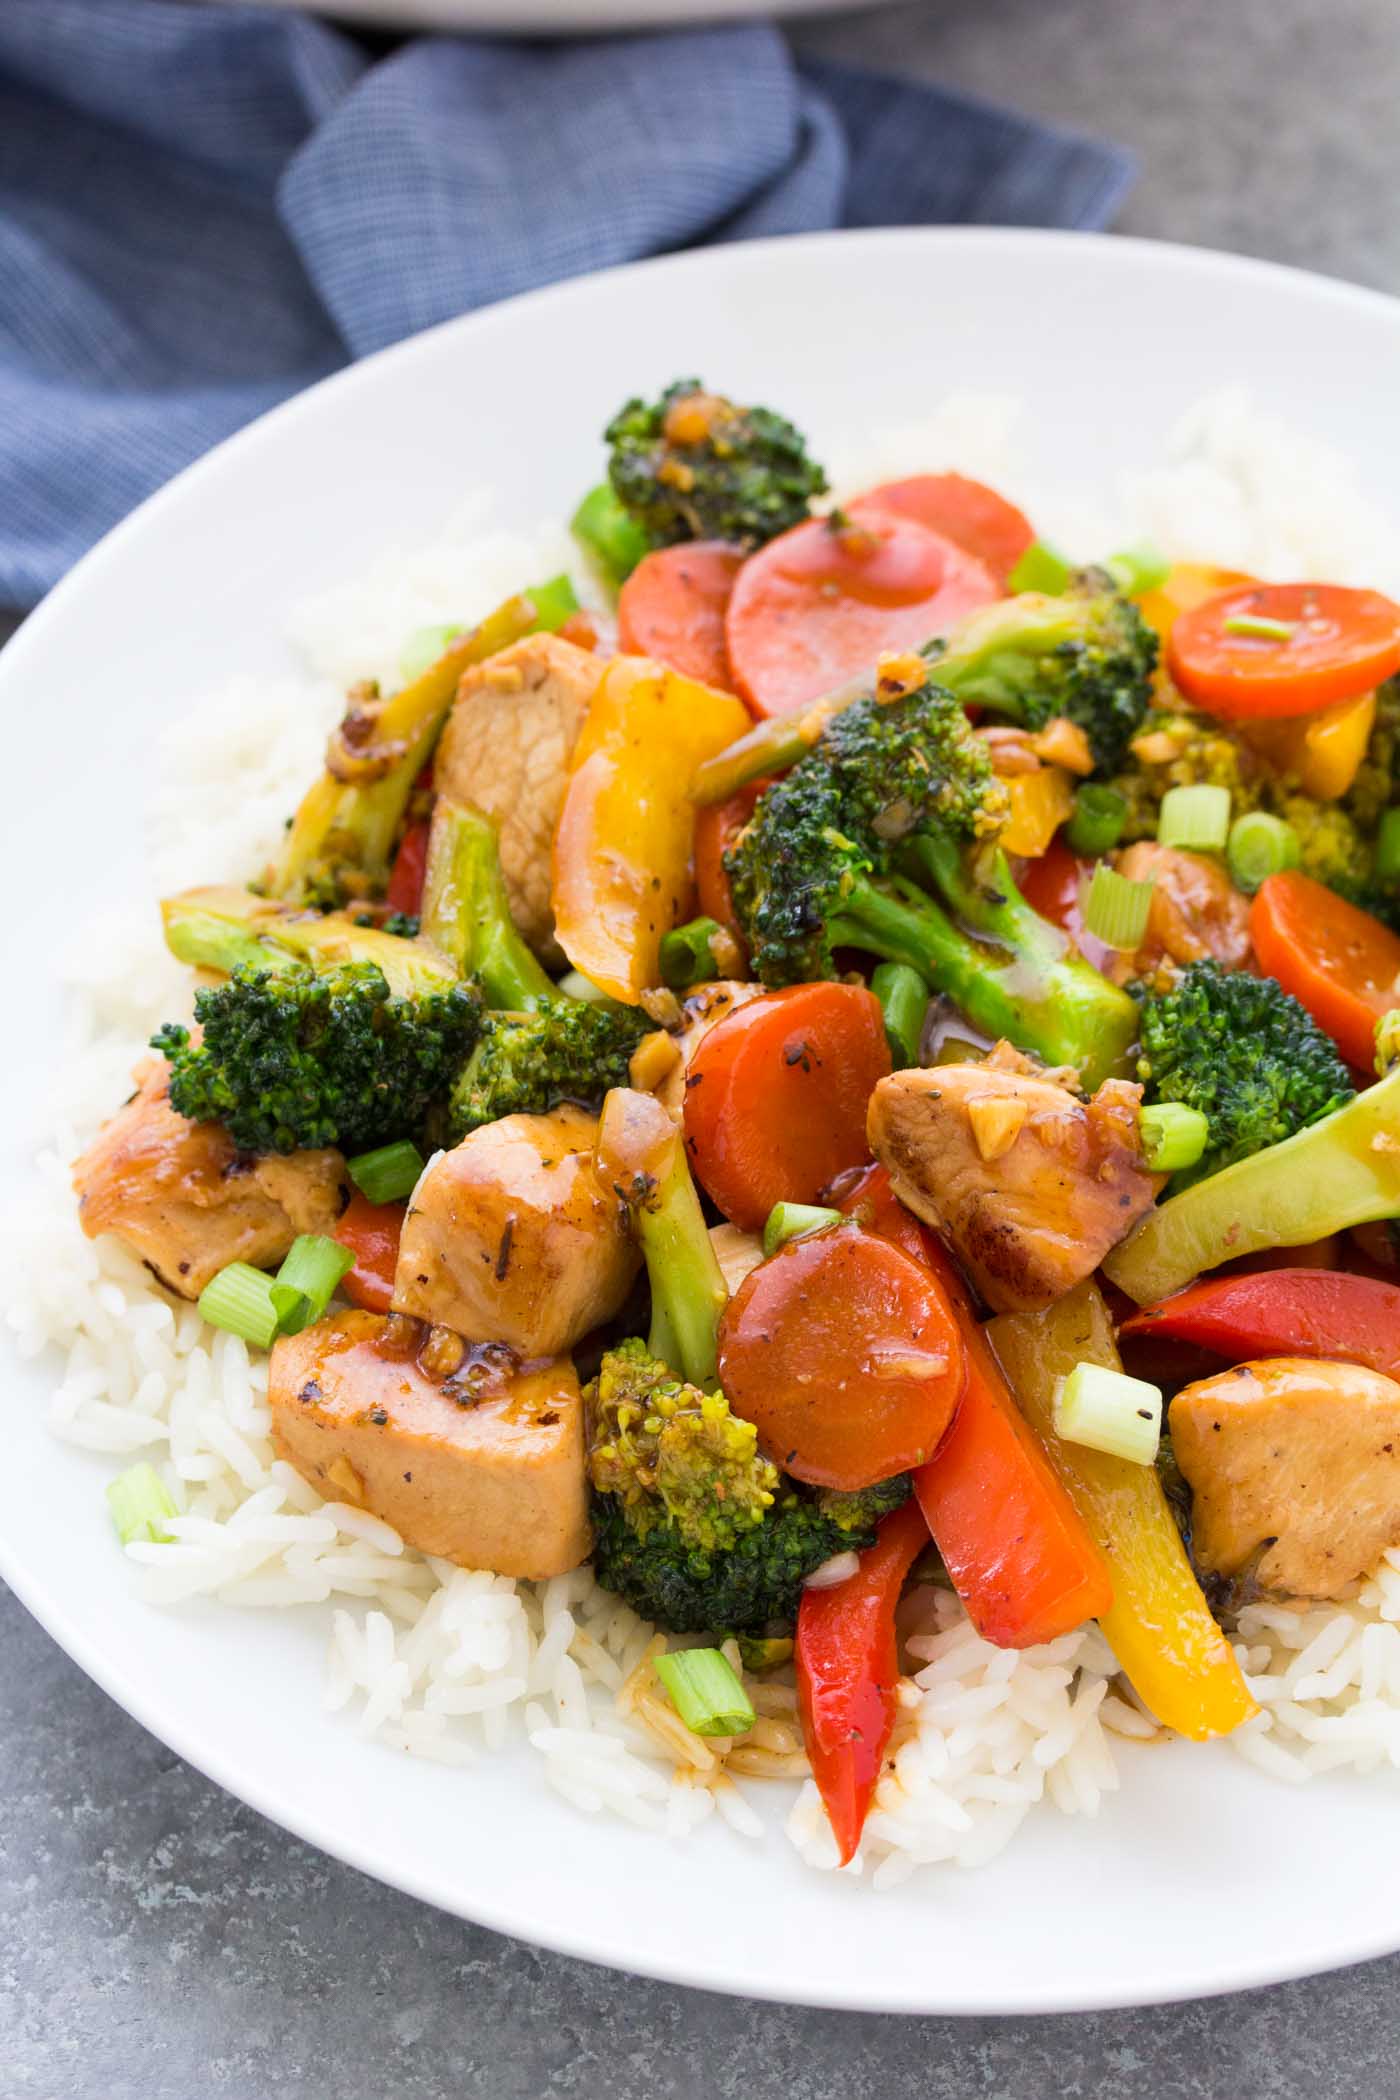 Chicken stir fry with vegetables served over rice.